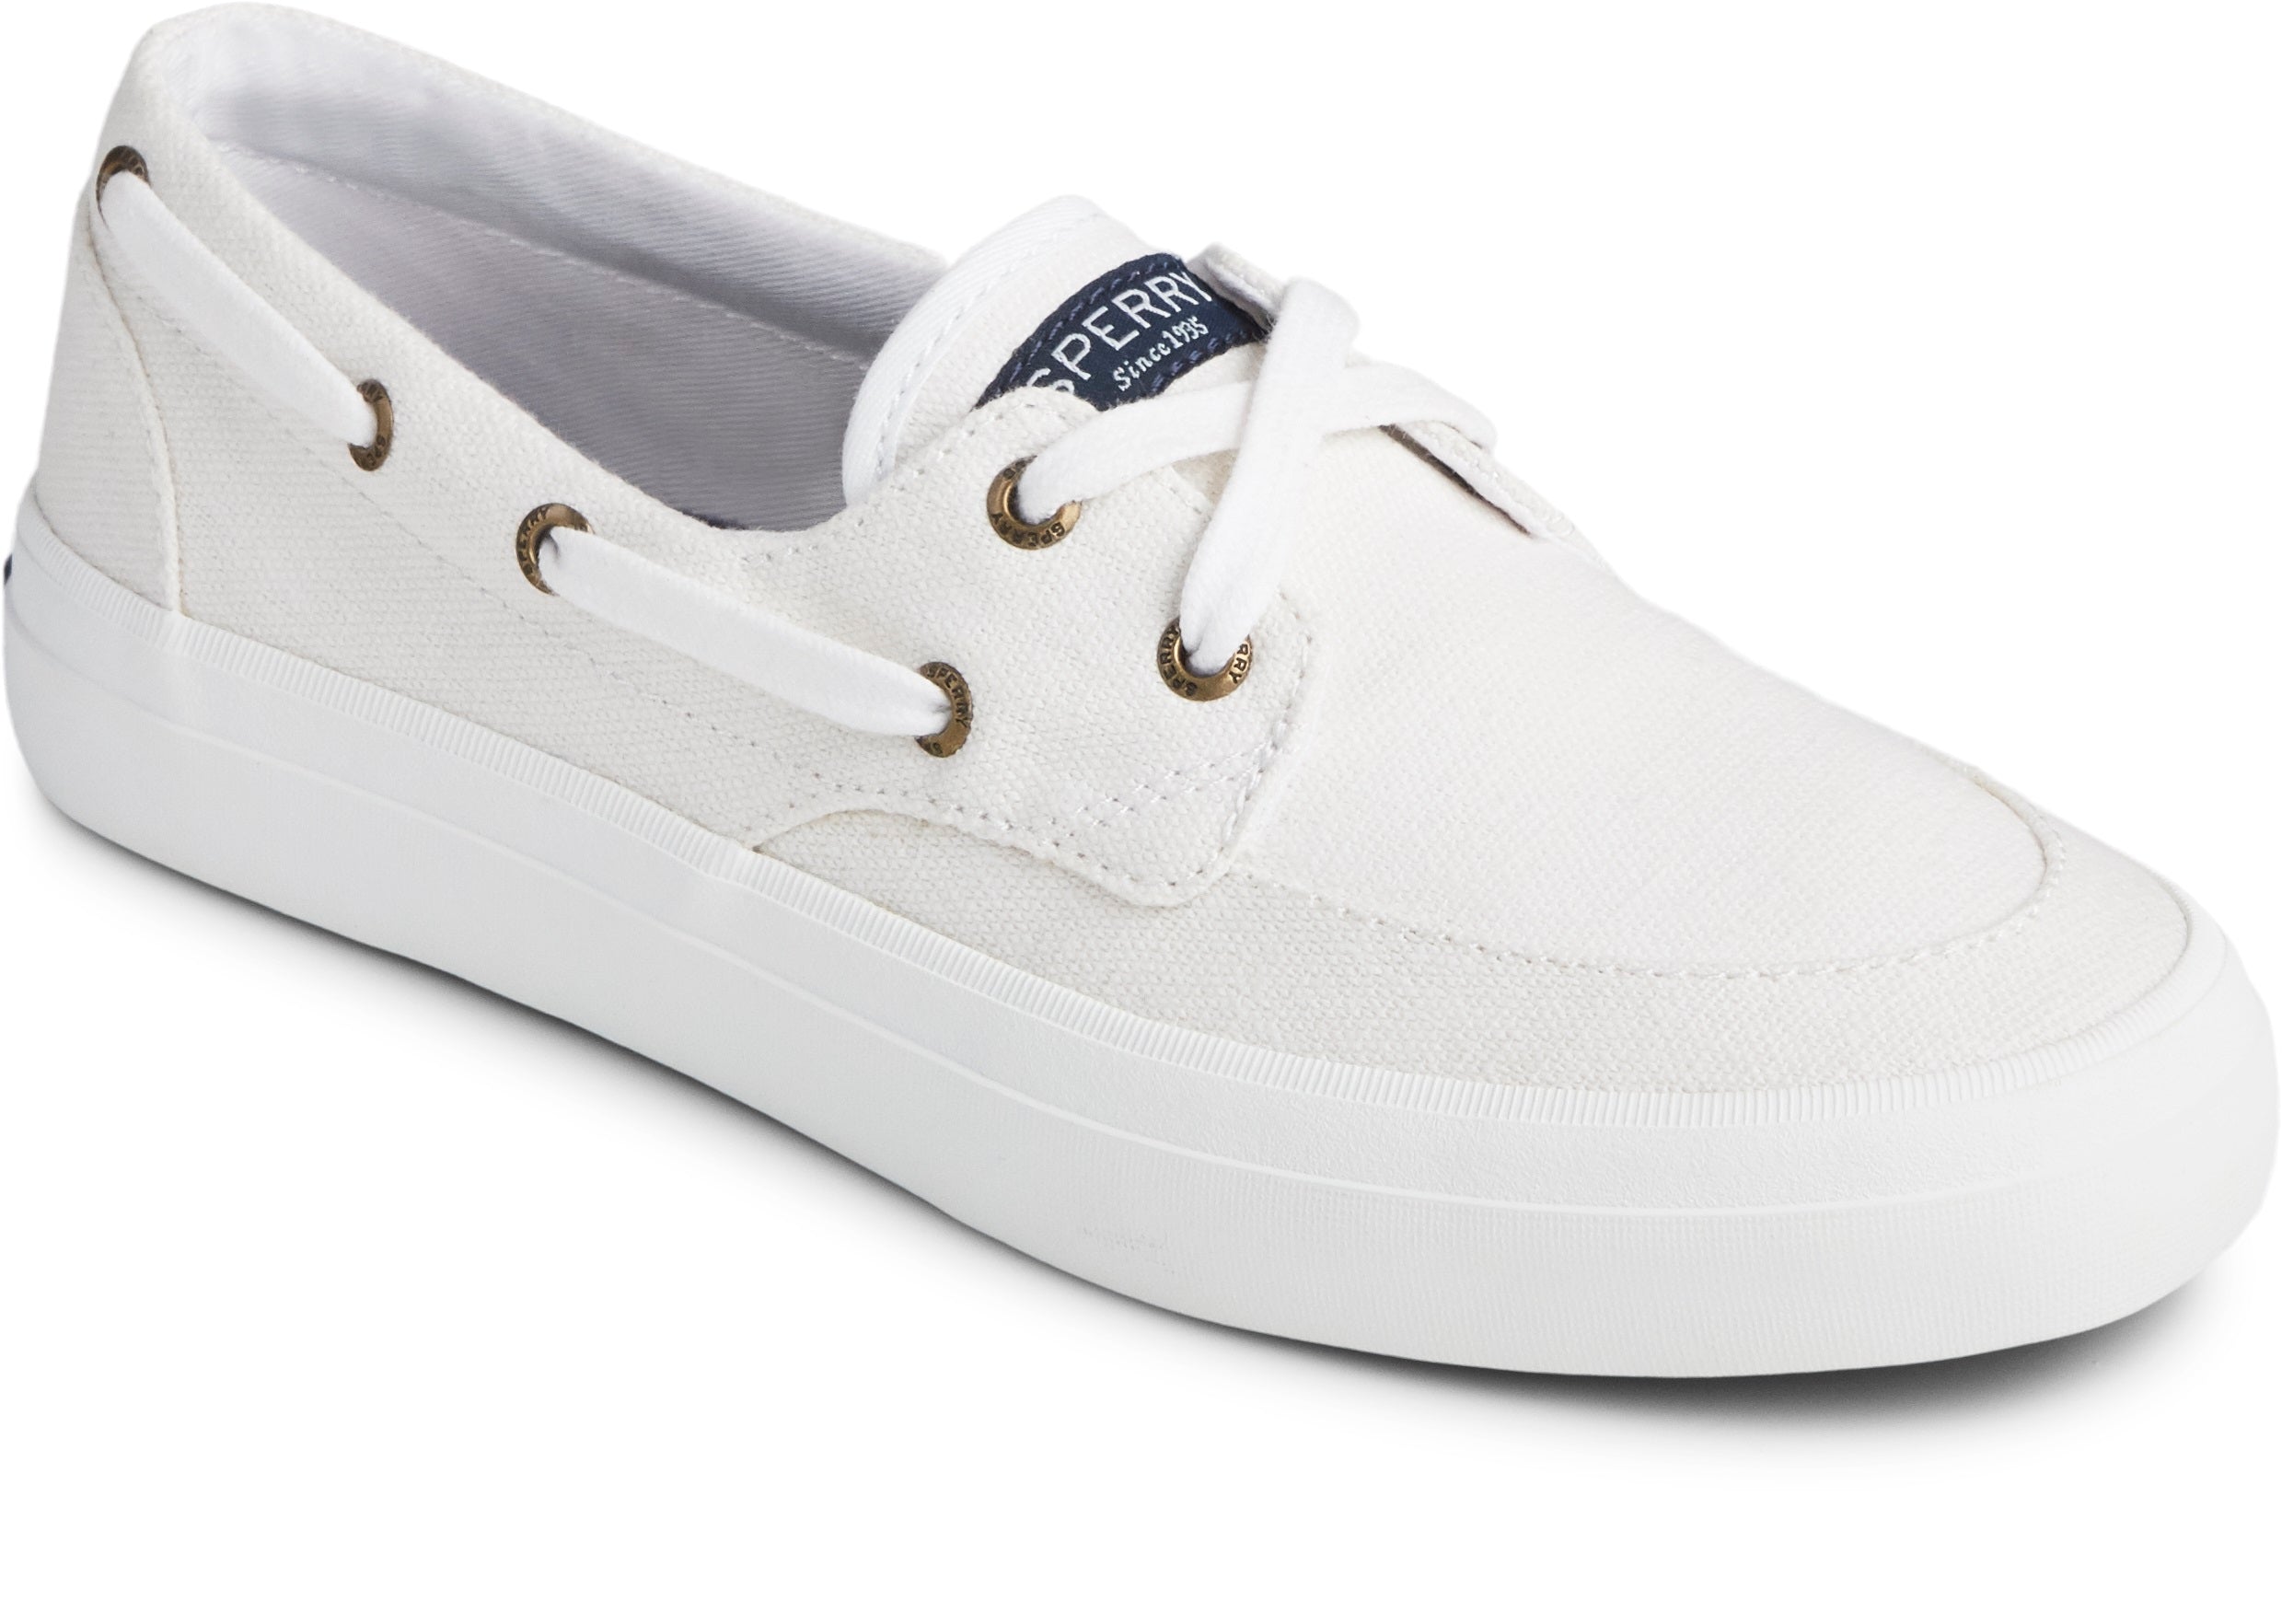 Shop for Sperry Women's Crest Boat Shoes Online | The SM Store